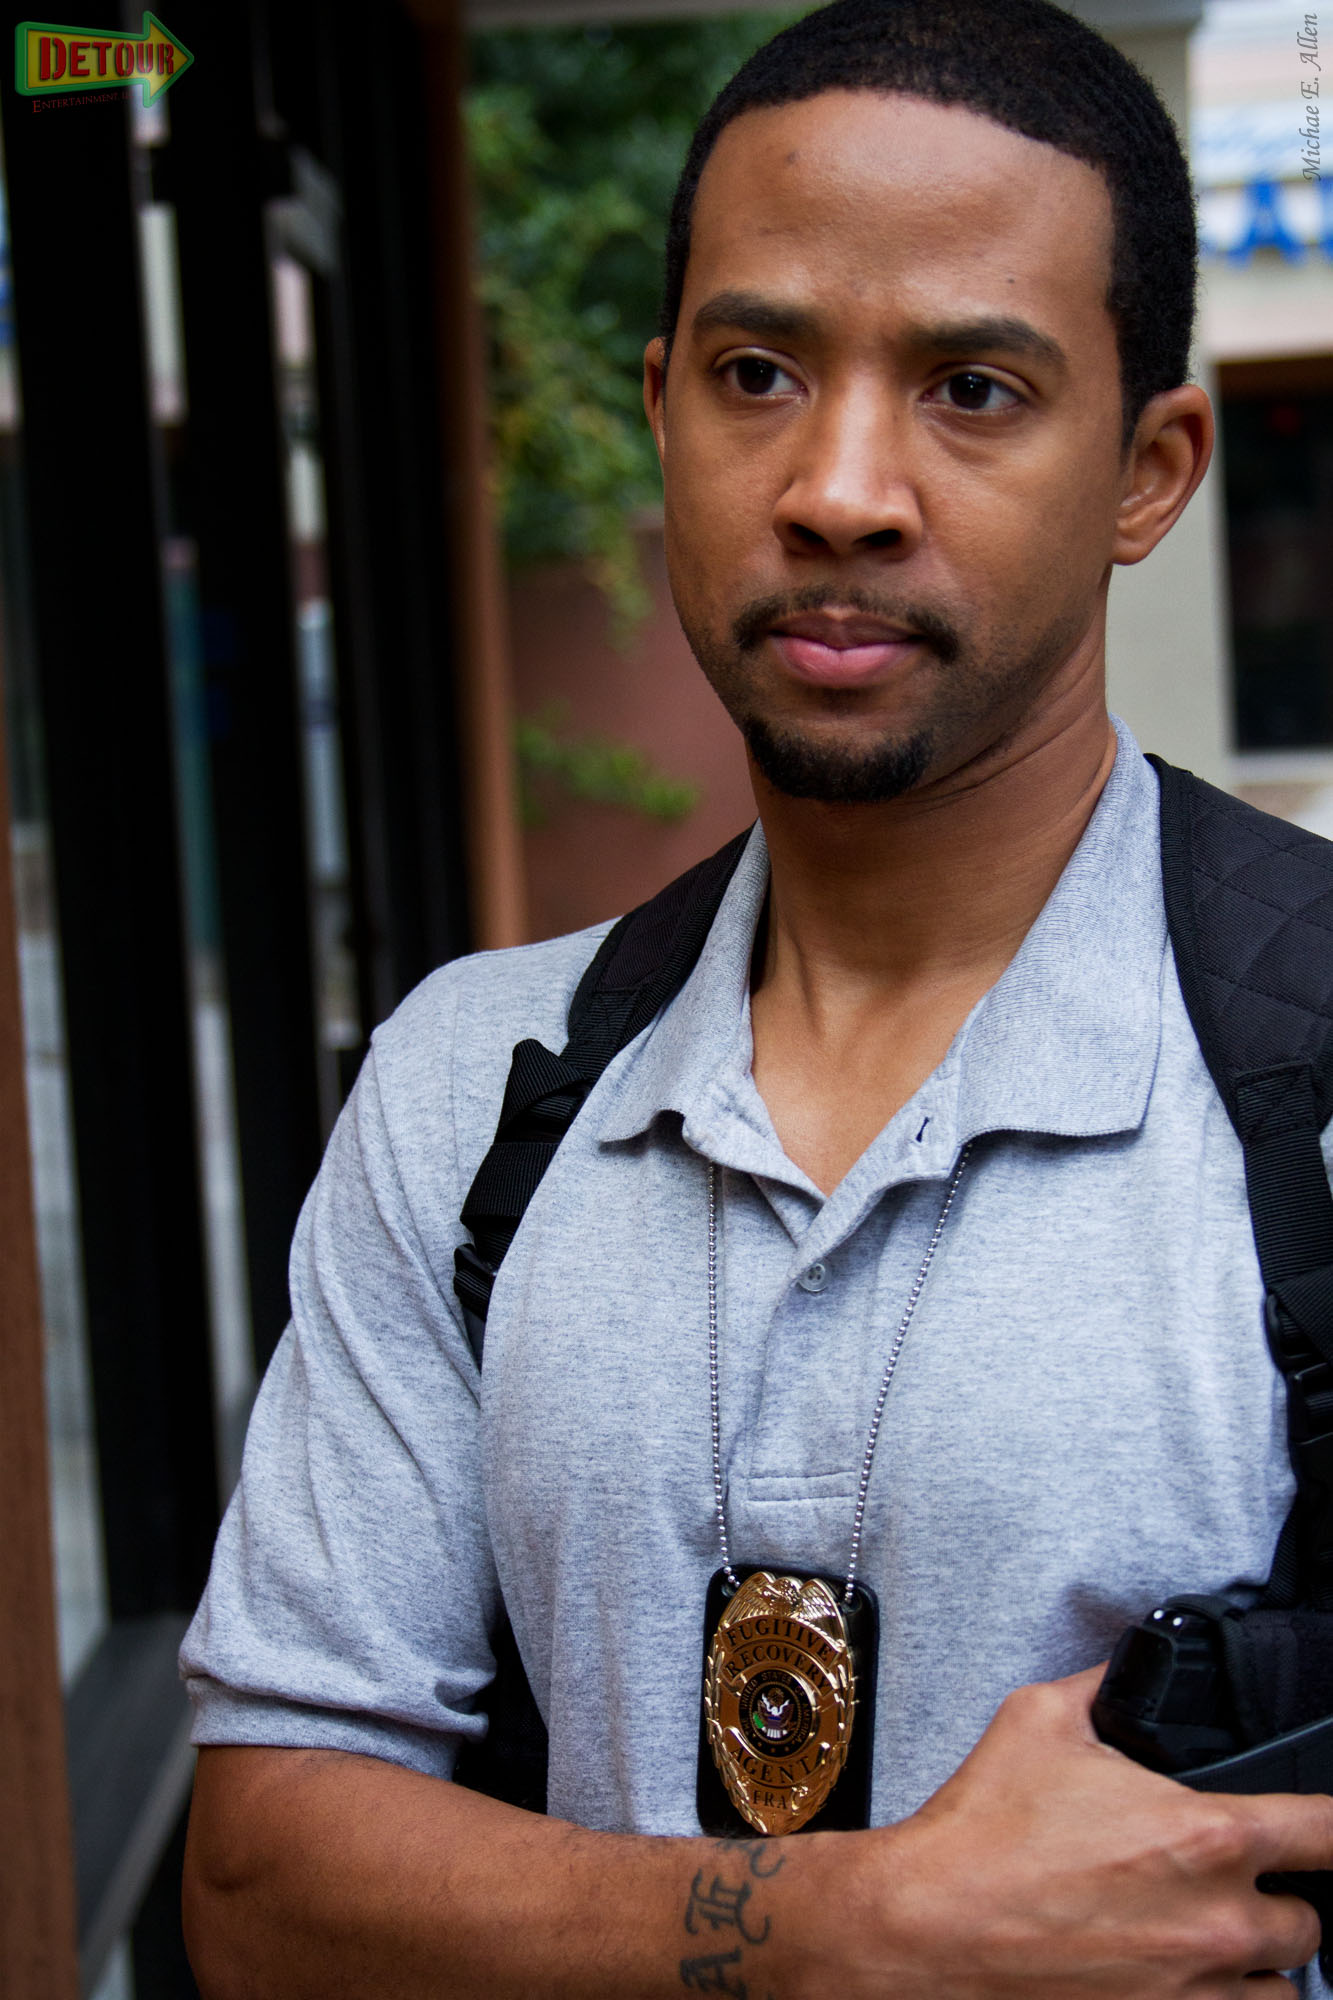 Chris Greene as the Detective in the short film 